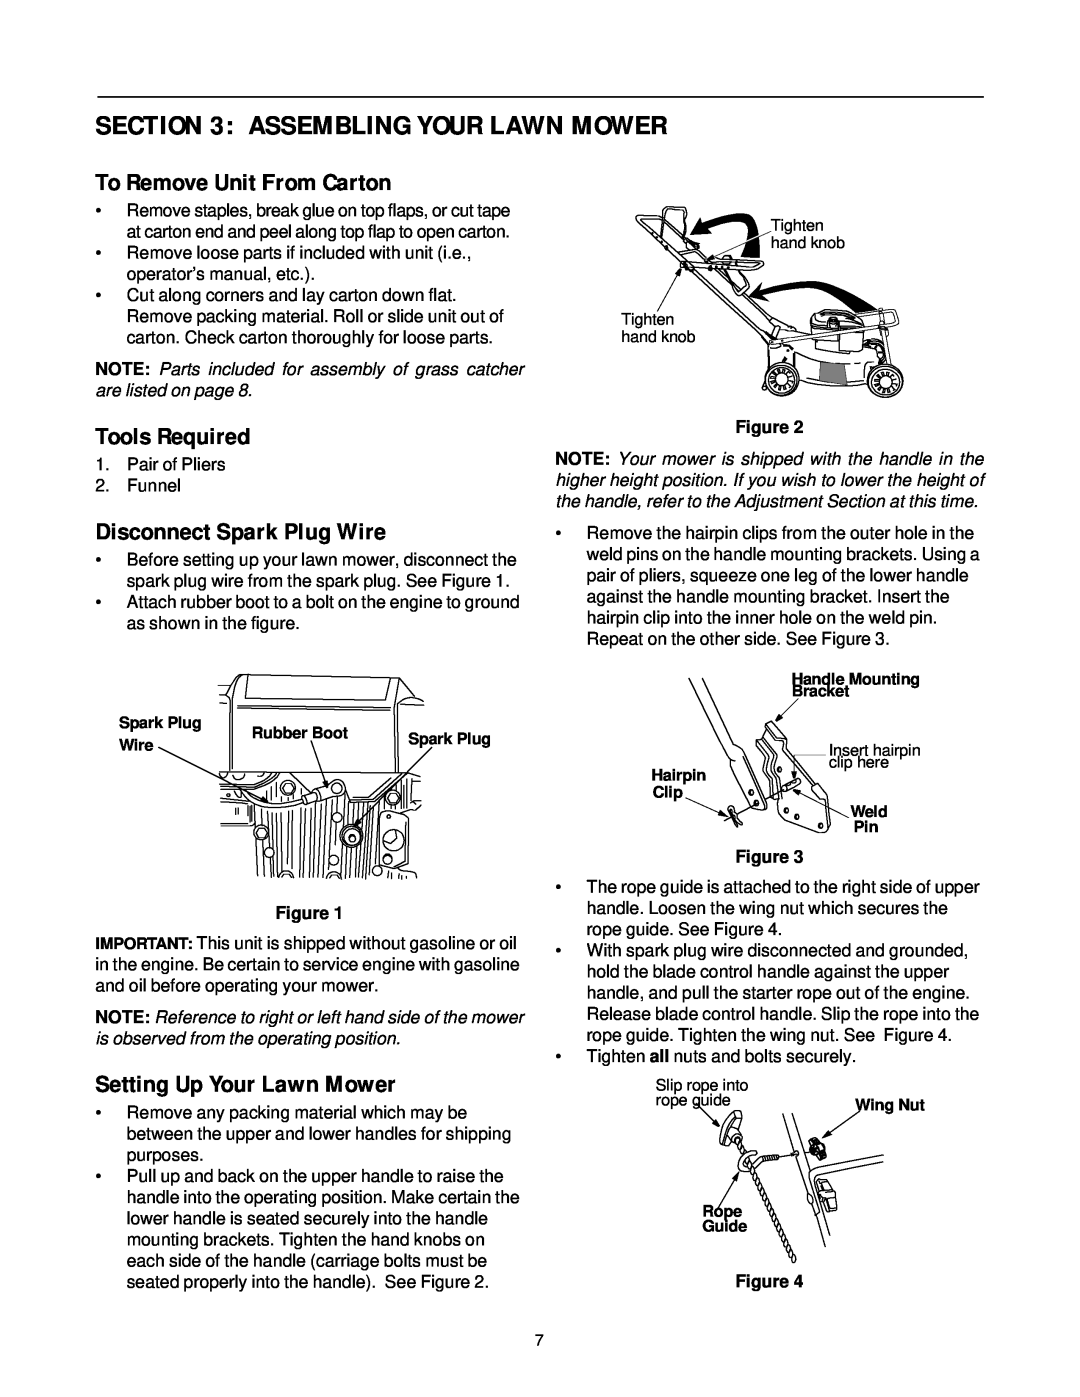 Cub Cadet PR-521 manual Assembling Your Lawn Mower, To Remove Unit From Carton, Tools Required, Disconnect Spark Plug Wire 